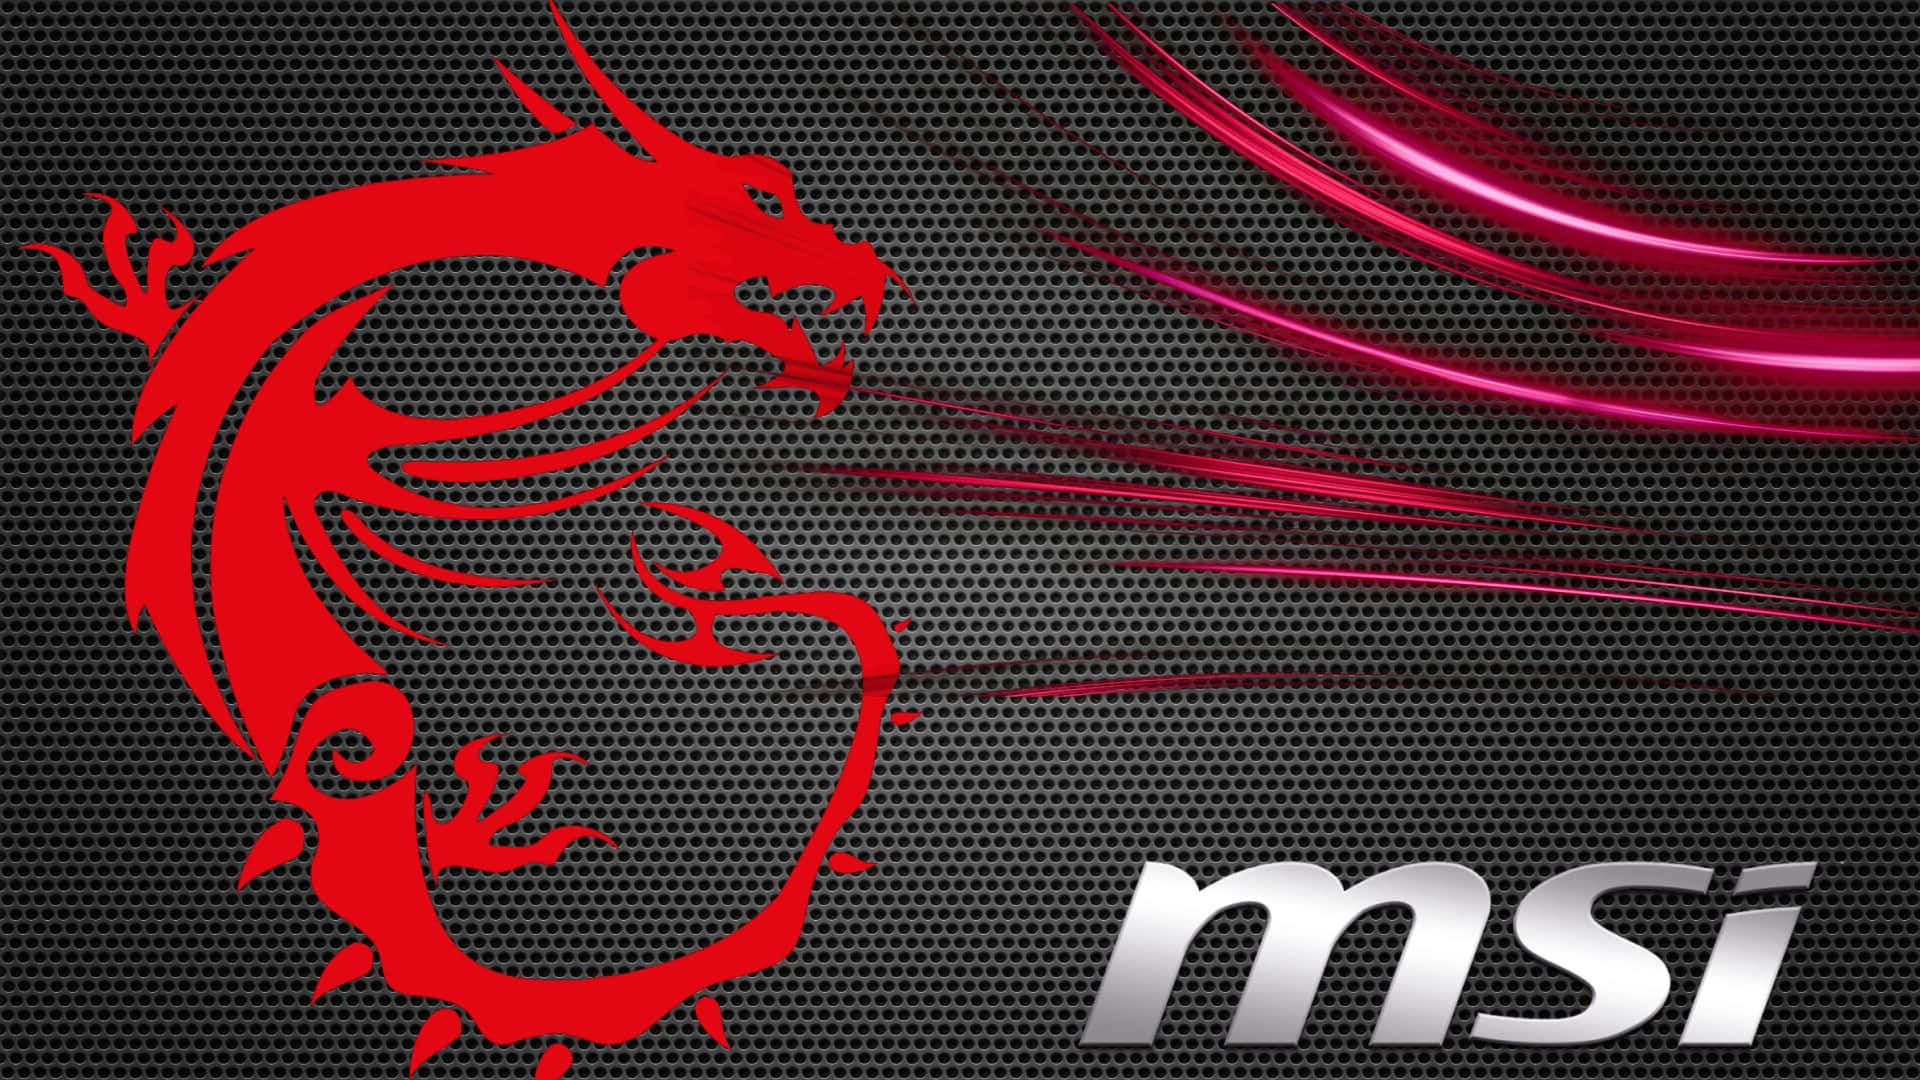 The world of gaming becomes more exciting with the MSI